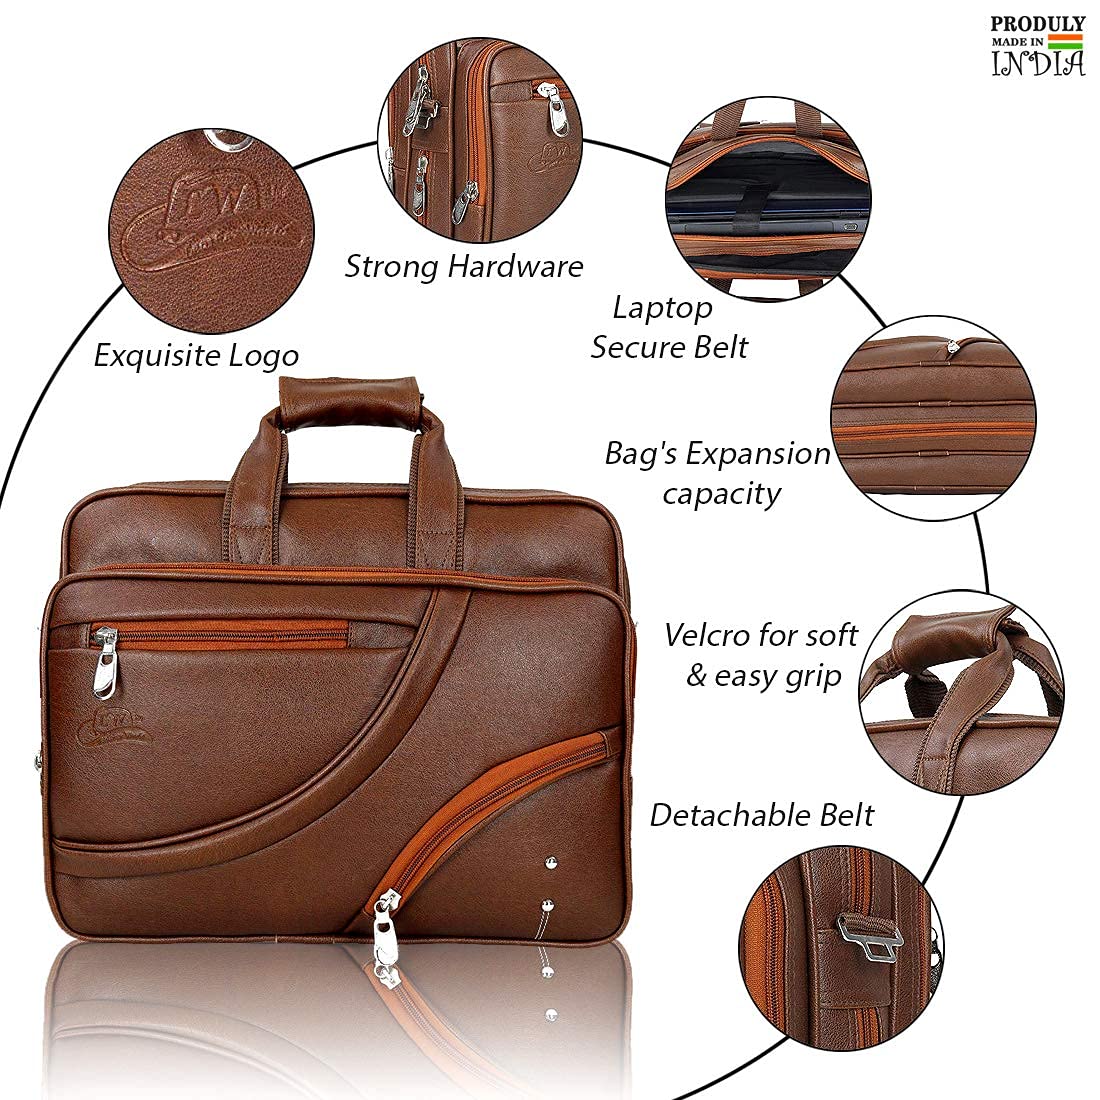 Leather World Pu Expandable 16 inch Water Resistant Laptop Office Business Bag Men Women Messenger Briefcase - Tan